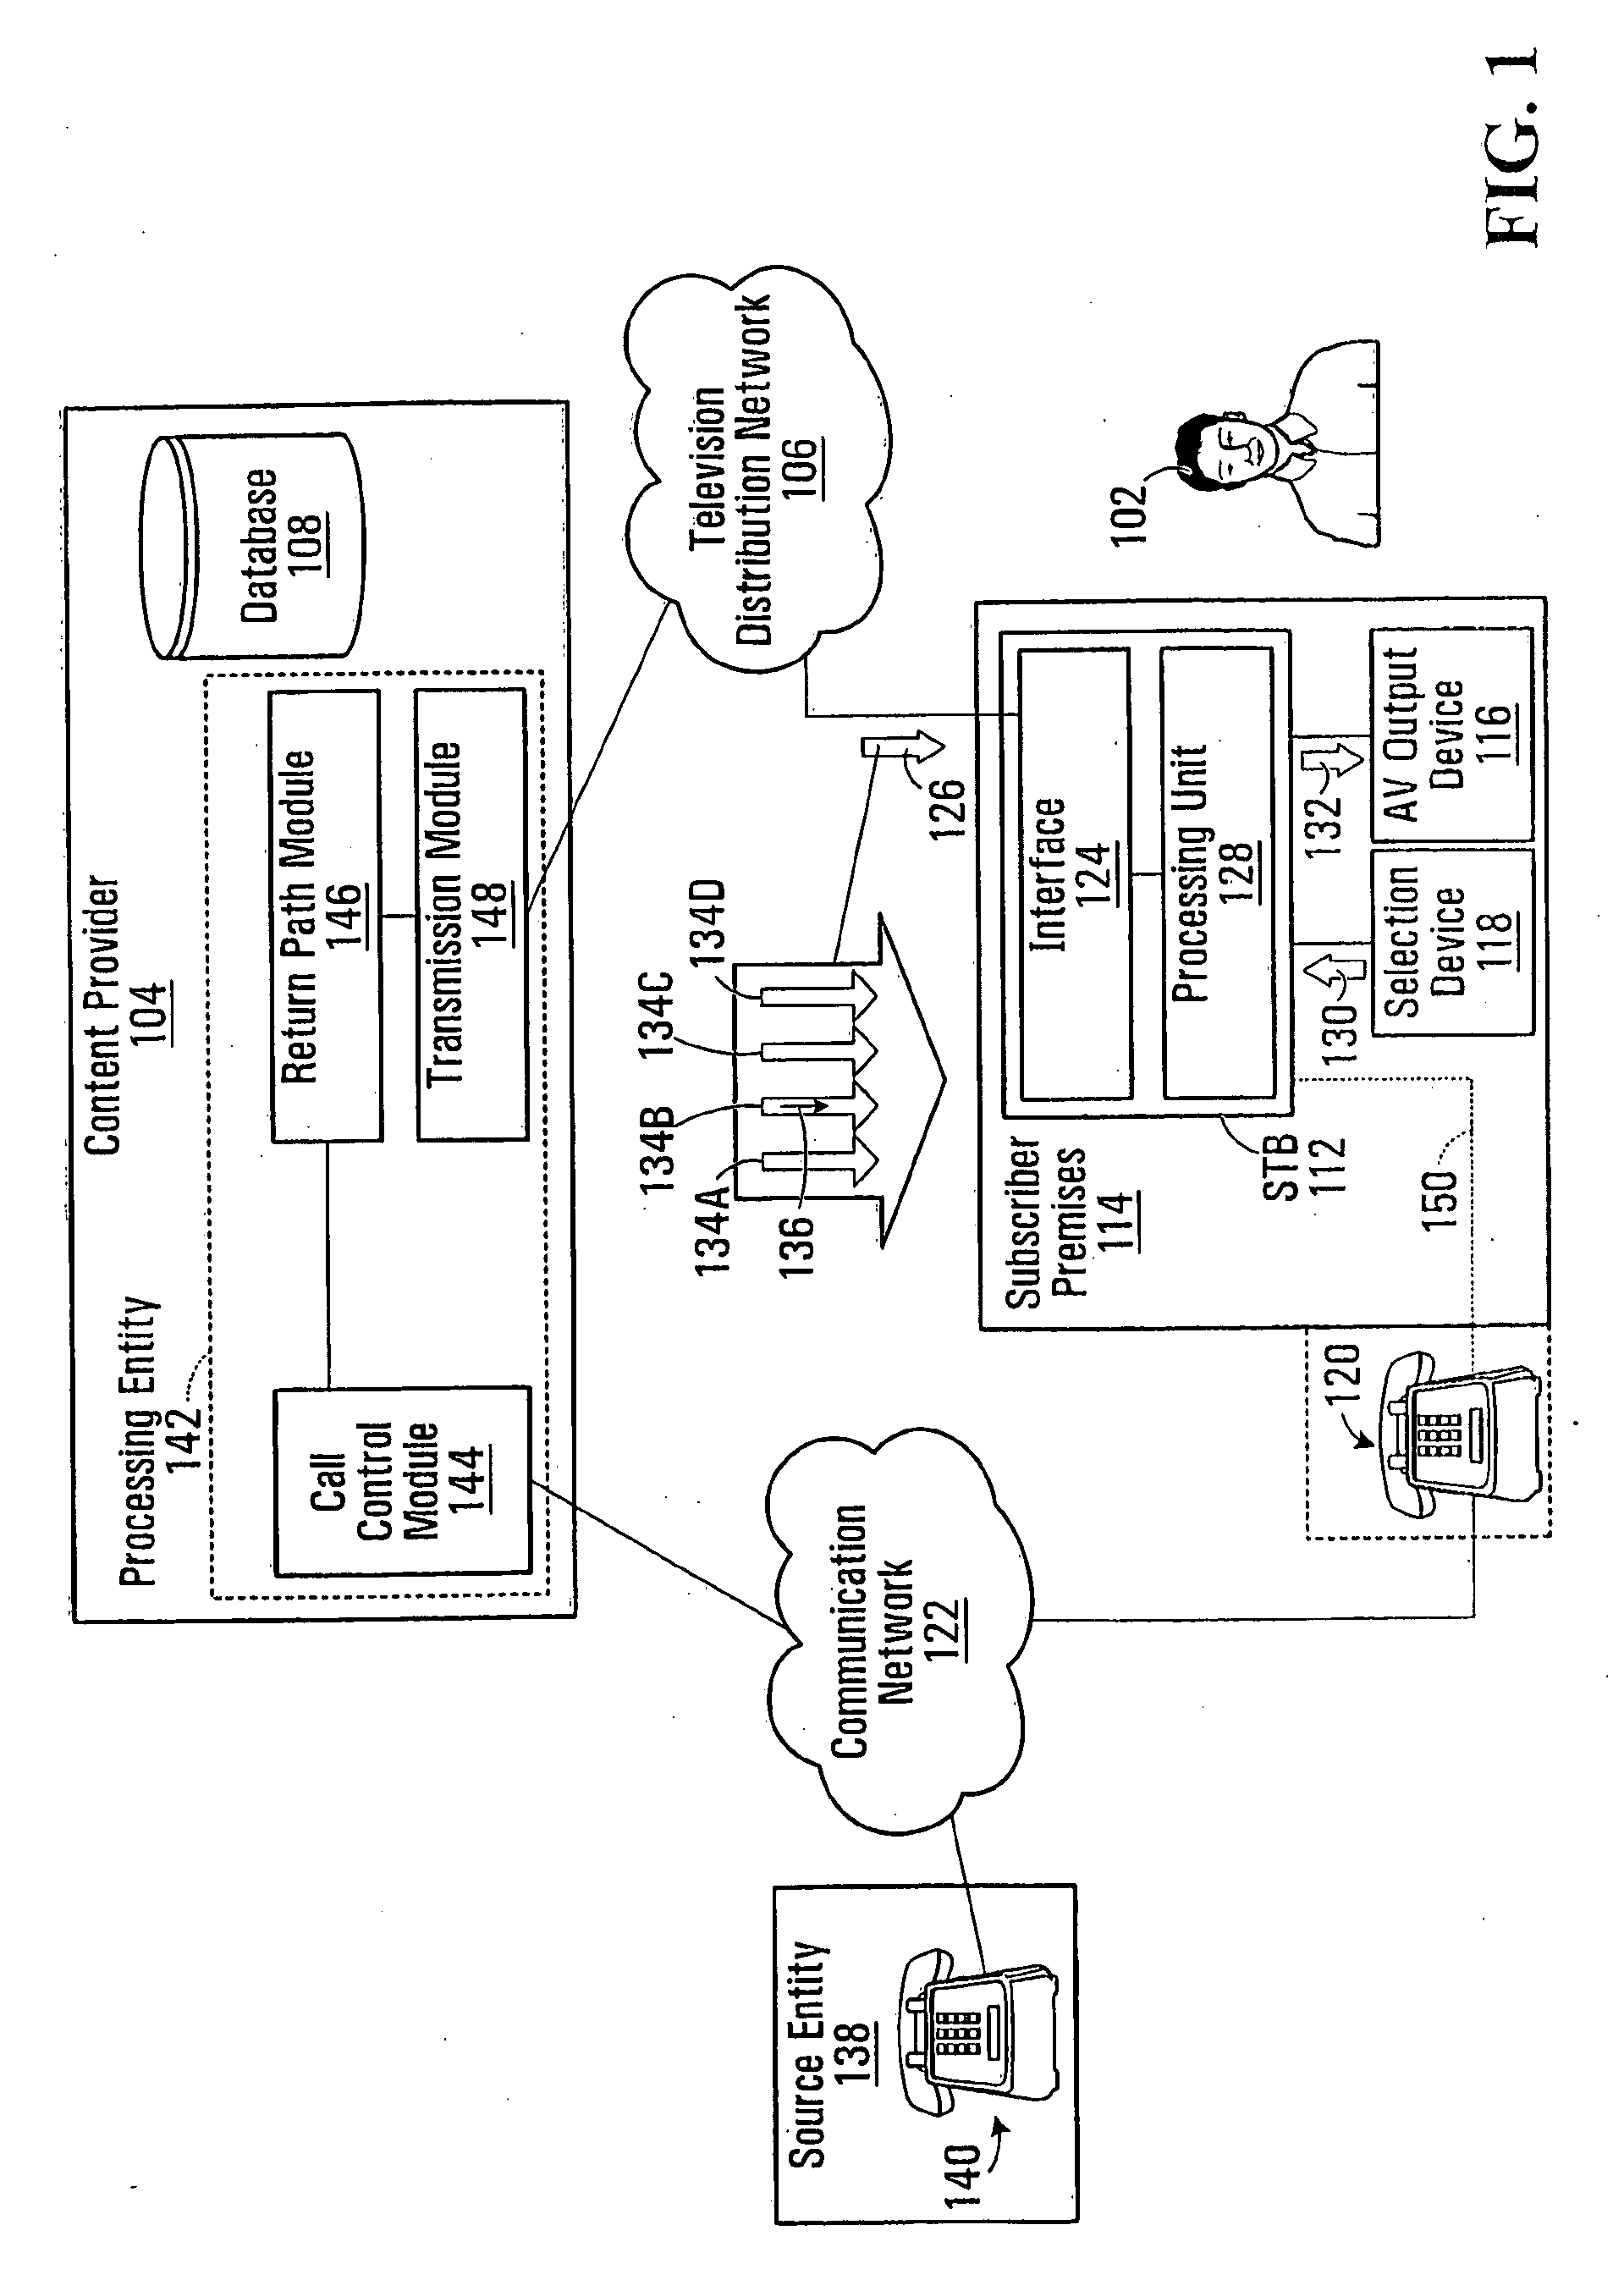 Method and apparatus for enabling viewers of television to enter into contact with a source of an advertised product or service